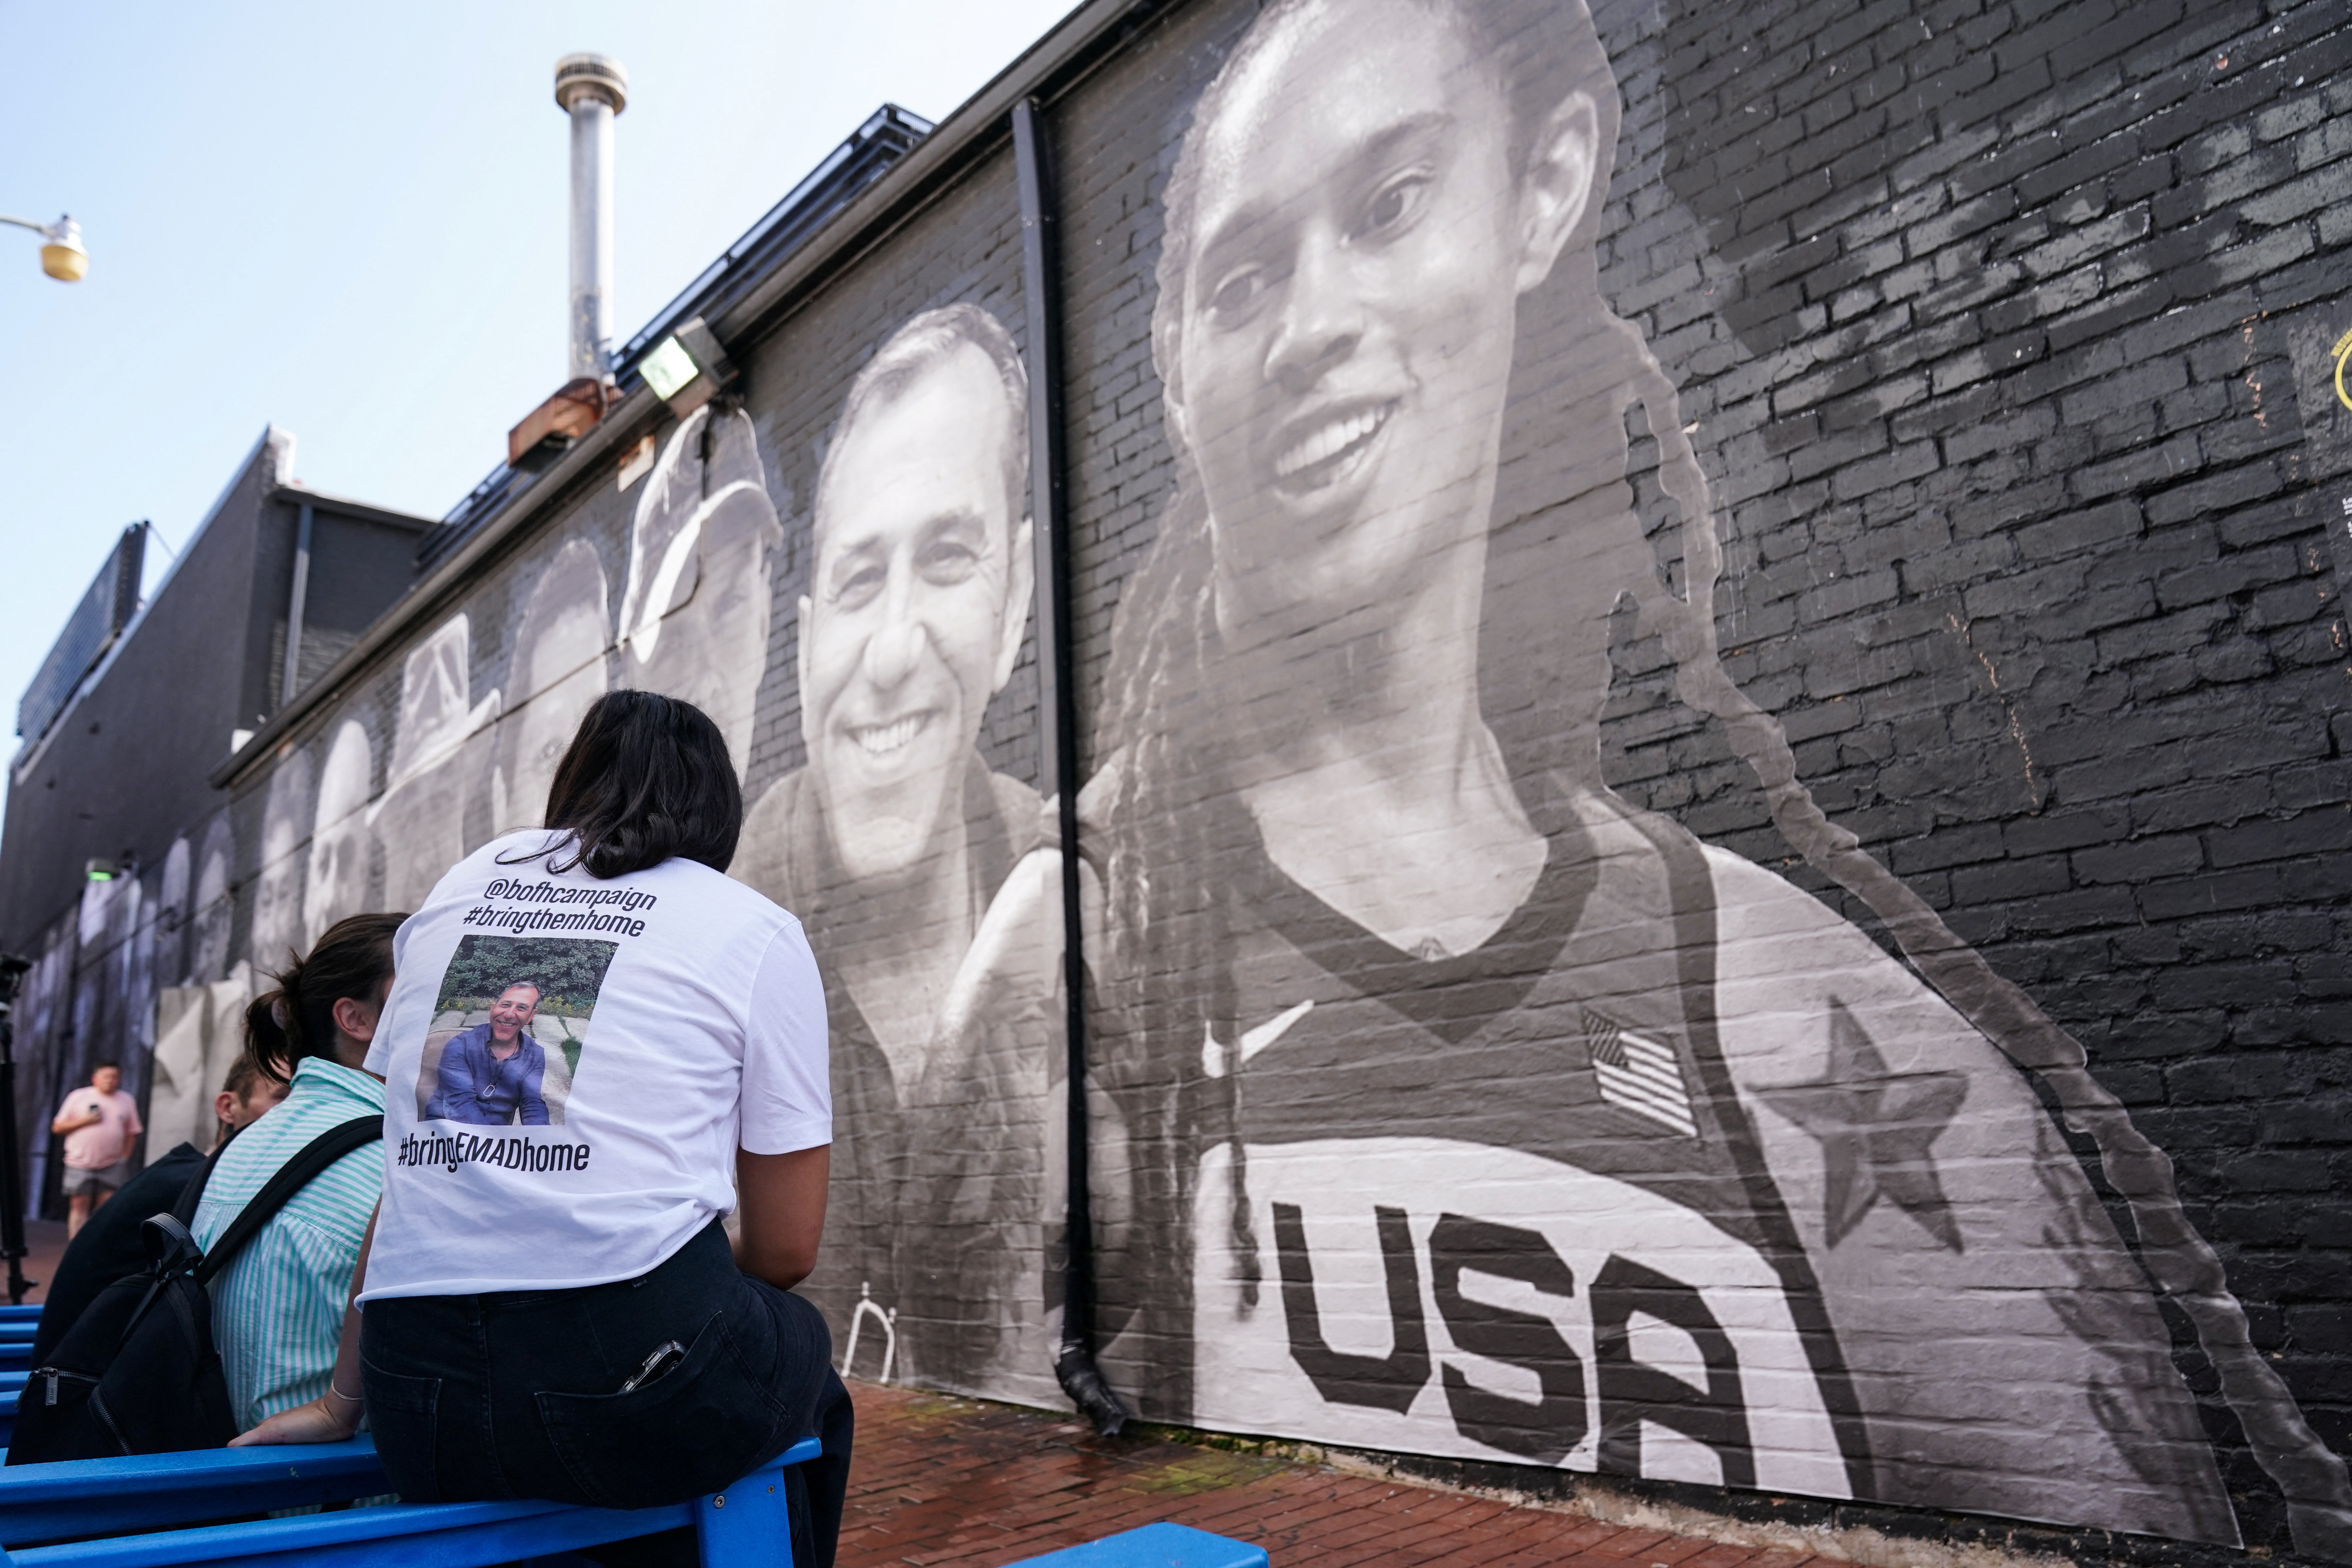 Brittney Griner and other hostages mural in Washington